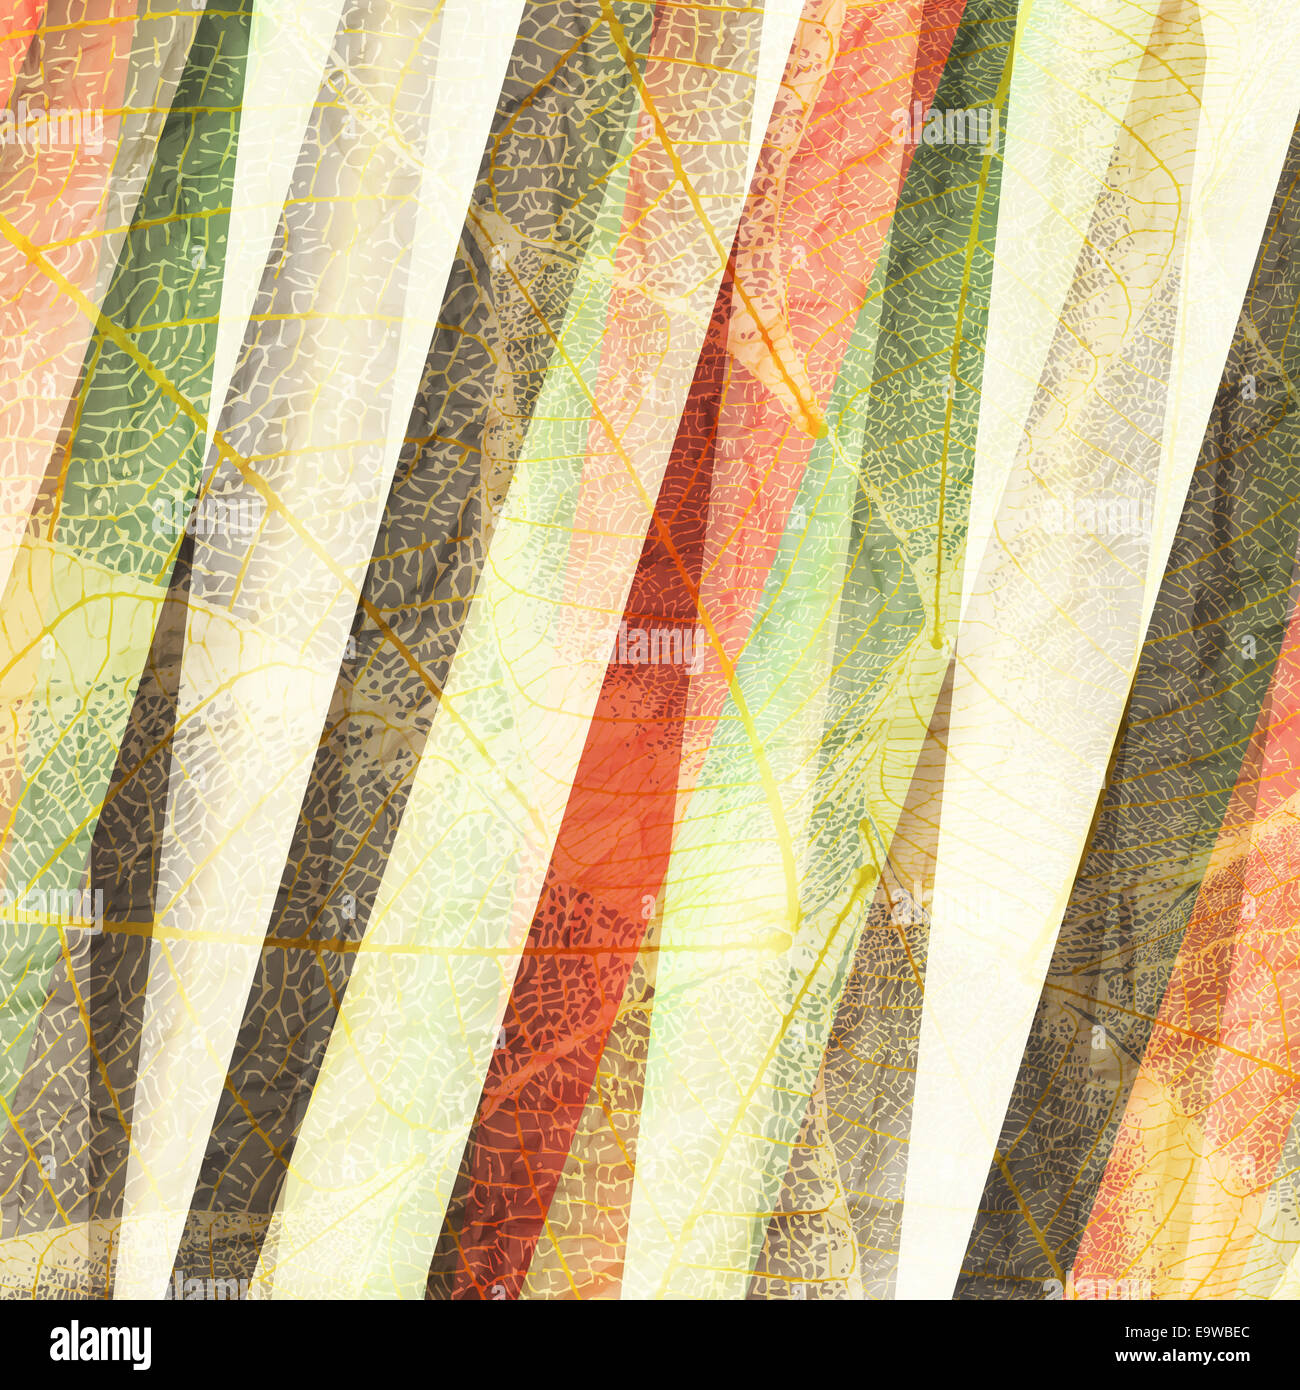 abstract, grunge background with leafs pattern over colorful stripes. vintage vector wallpaper Stock Photo